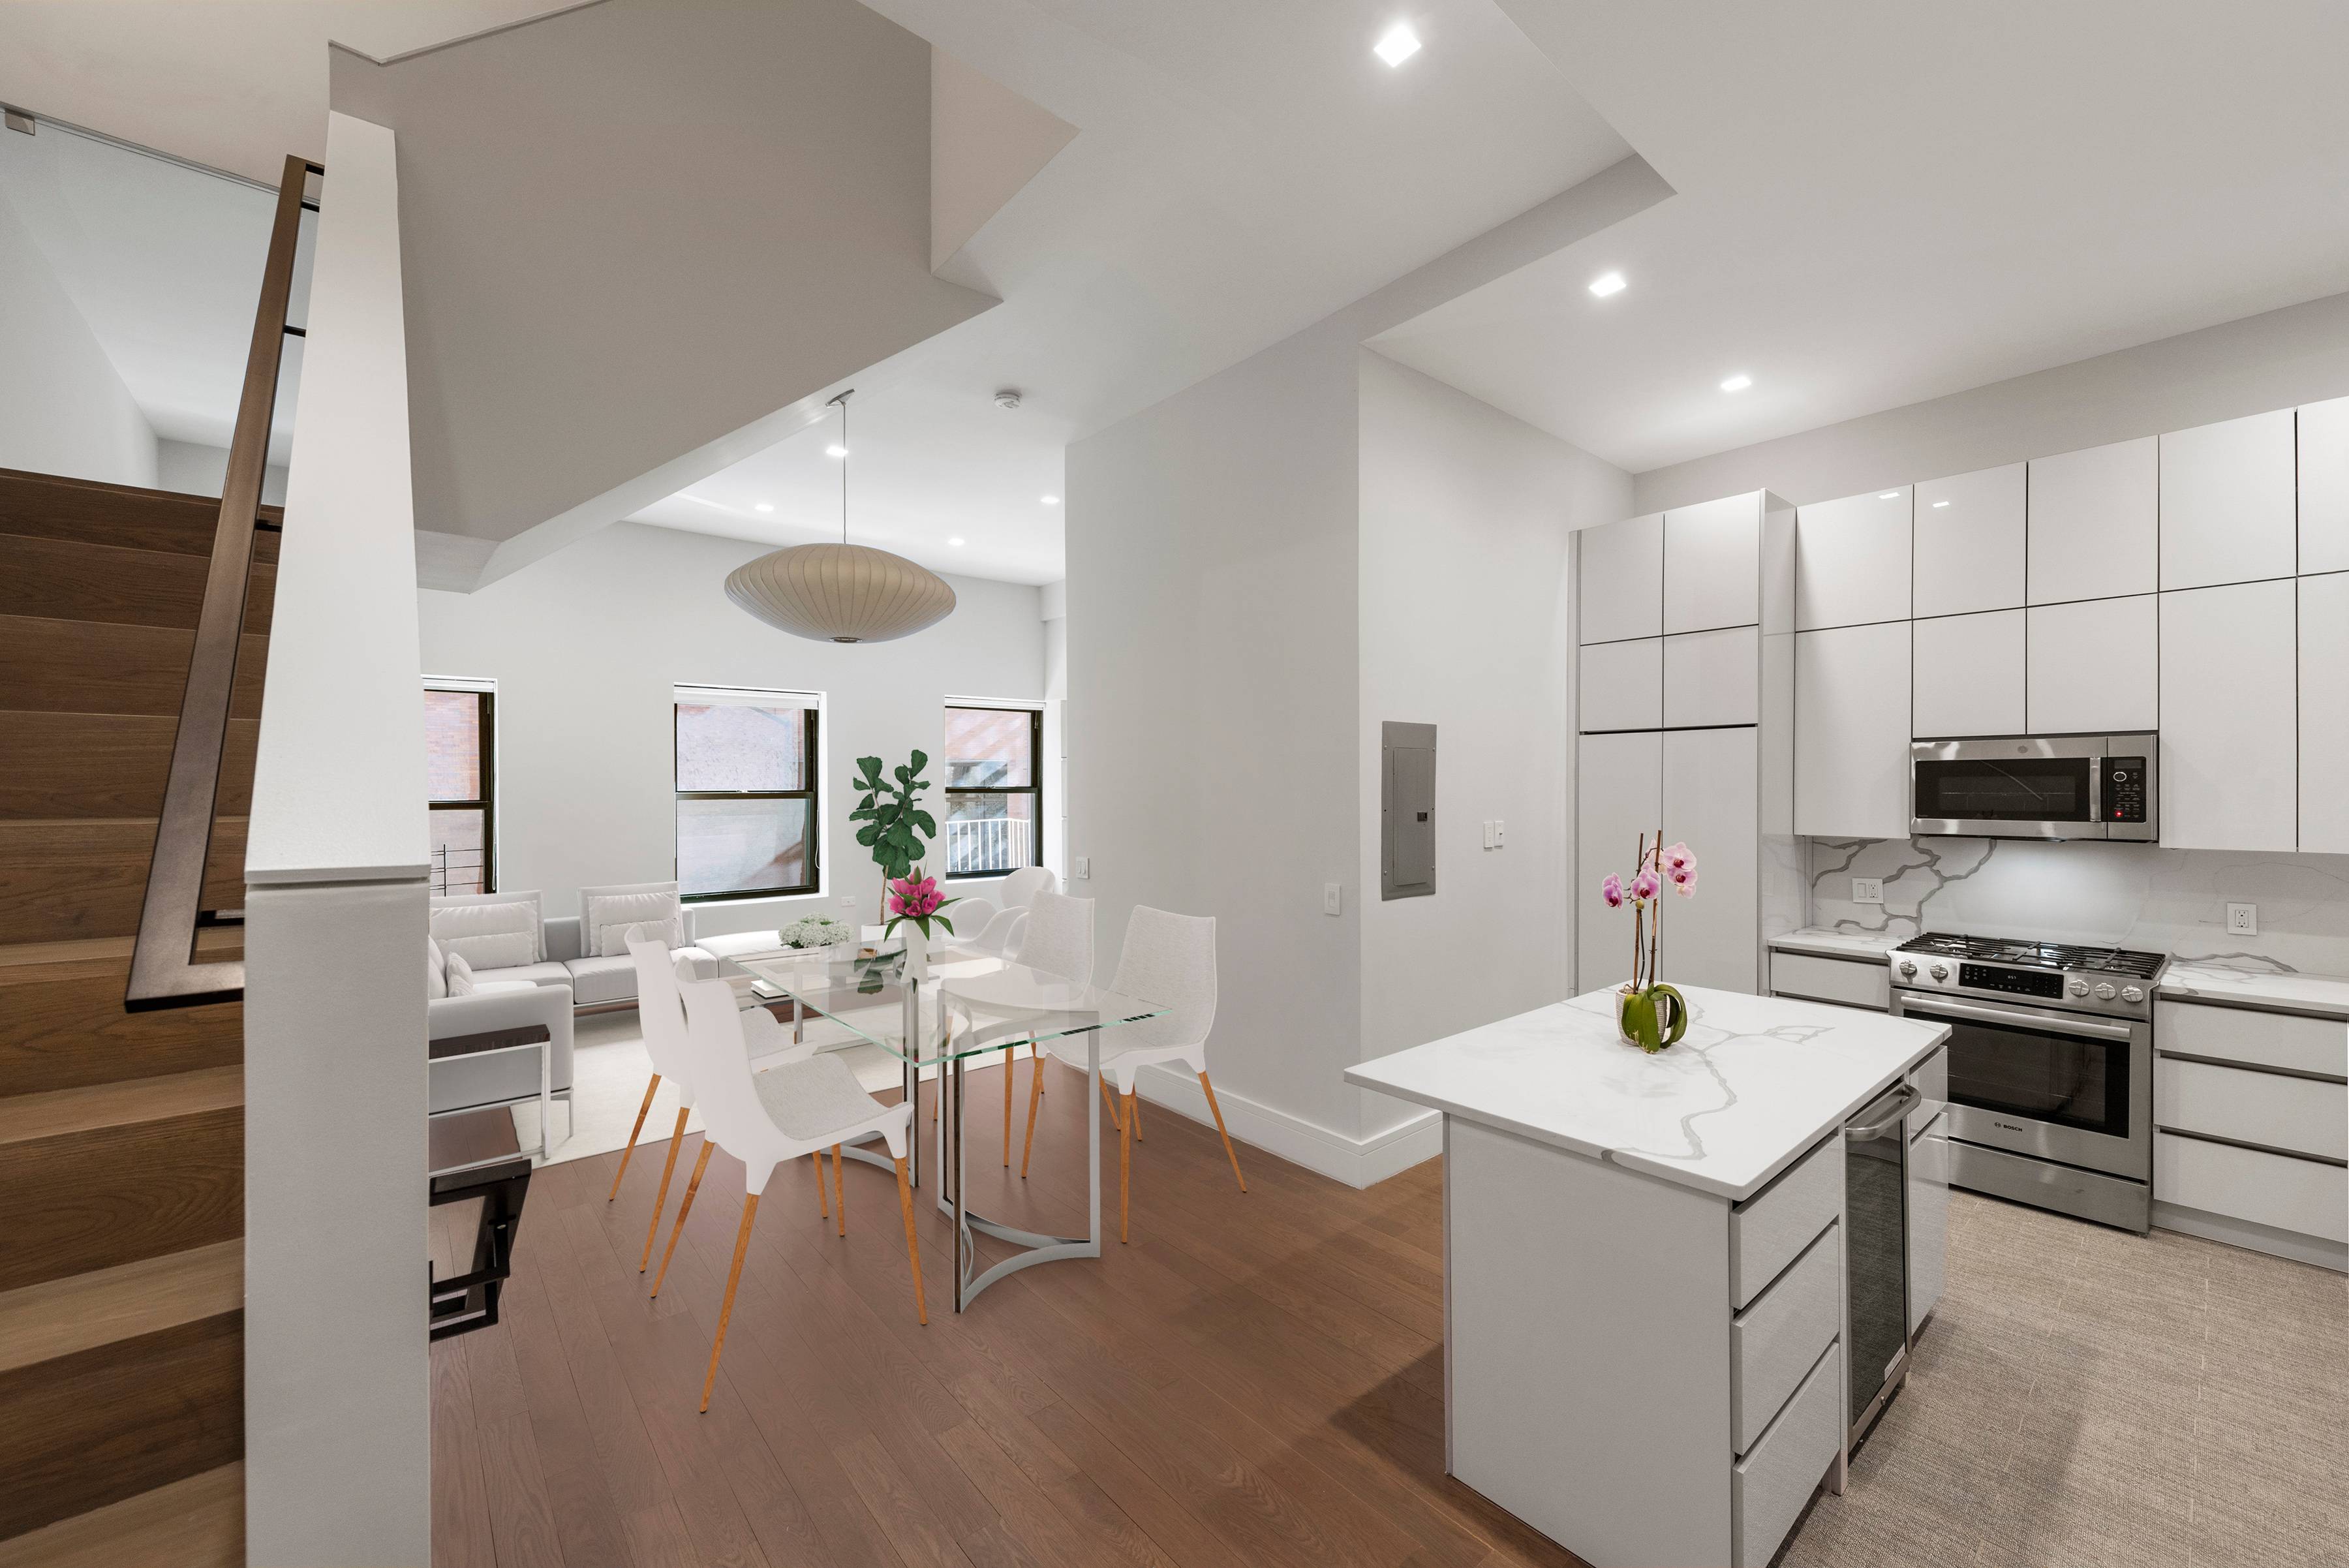 Triple Mint Two Bedroom Two Bath Renovated Loft with 16 ft ceilings in Iconic Doorman Building in Greenwich Village/Noho